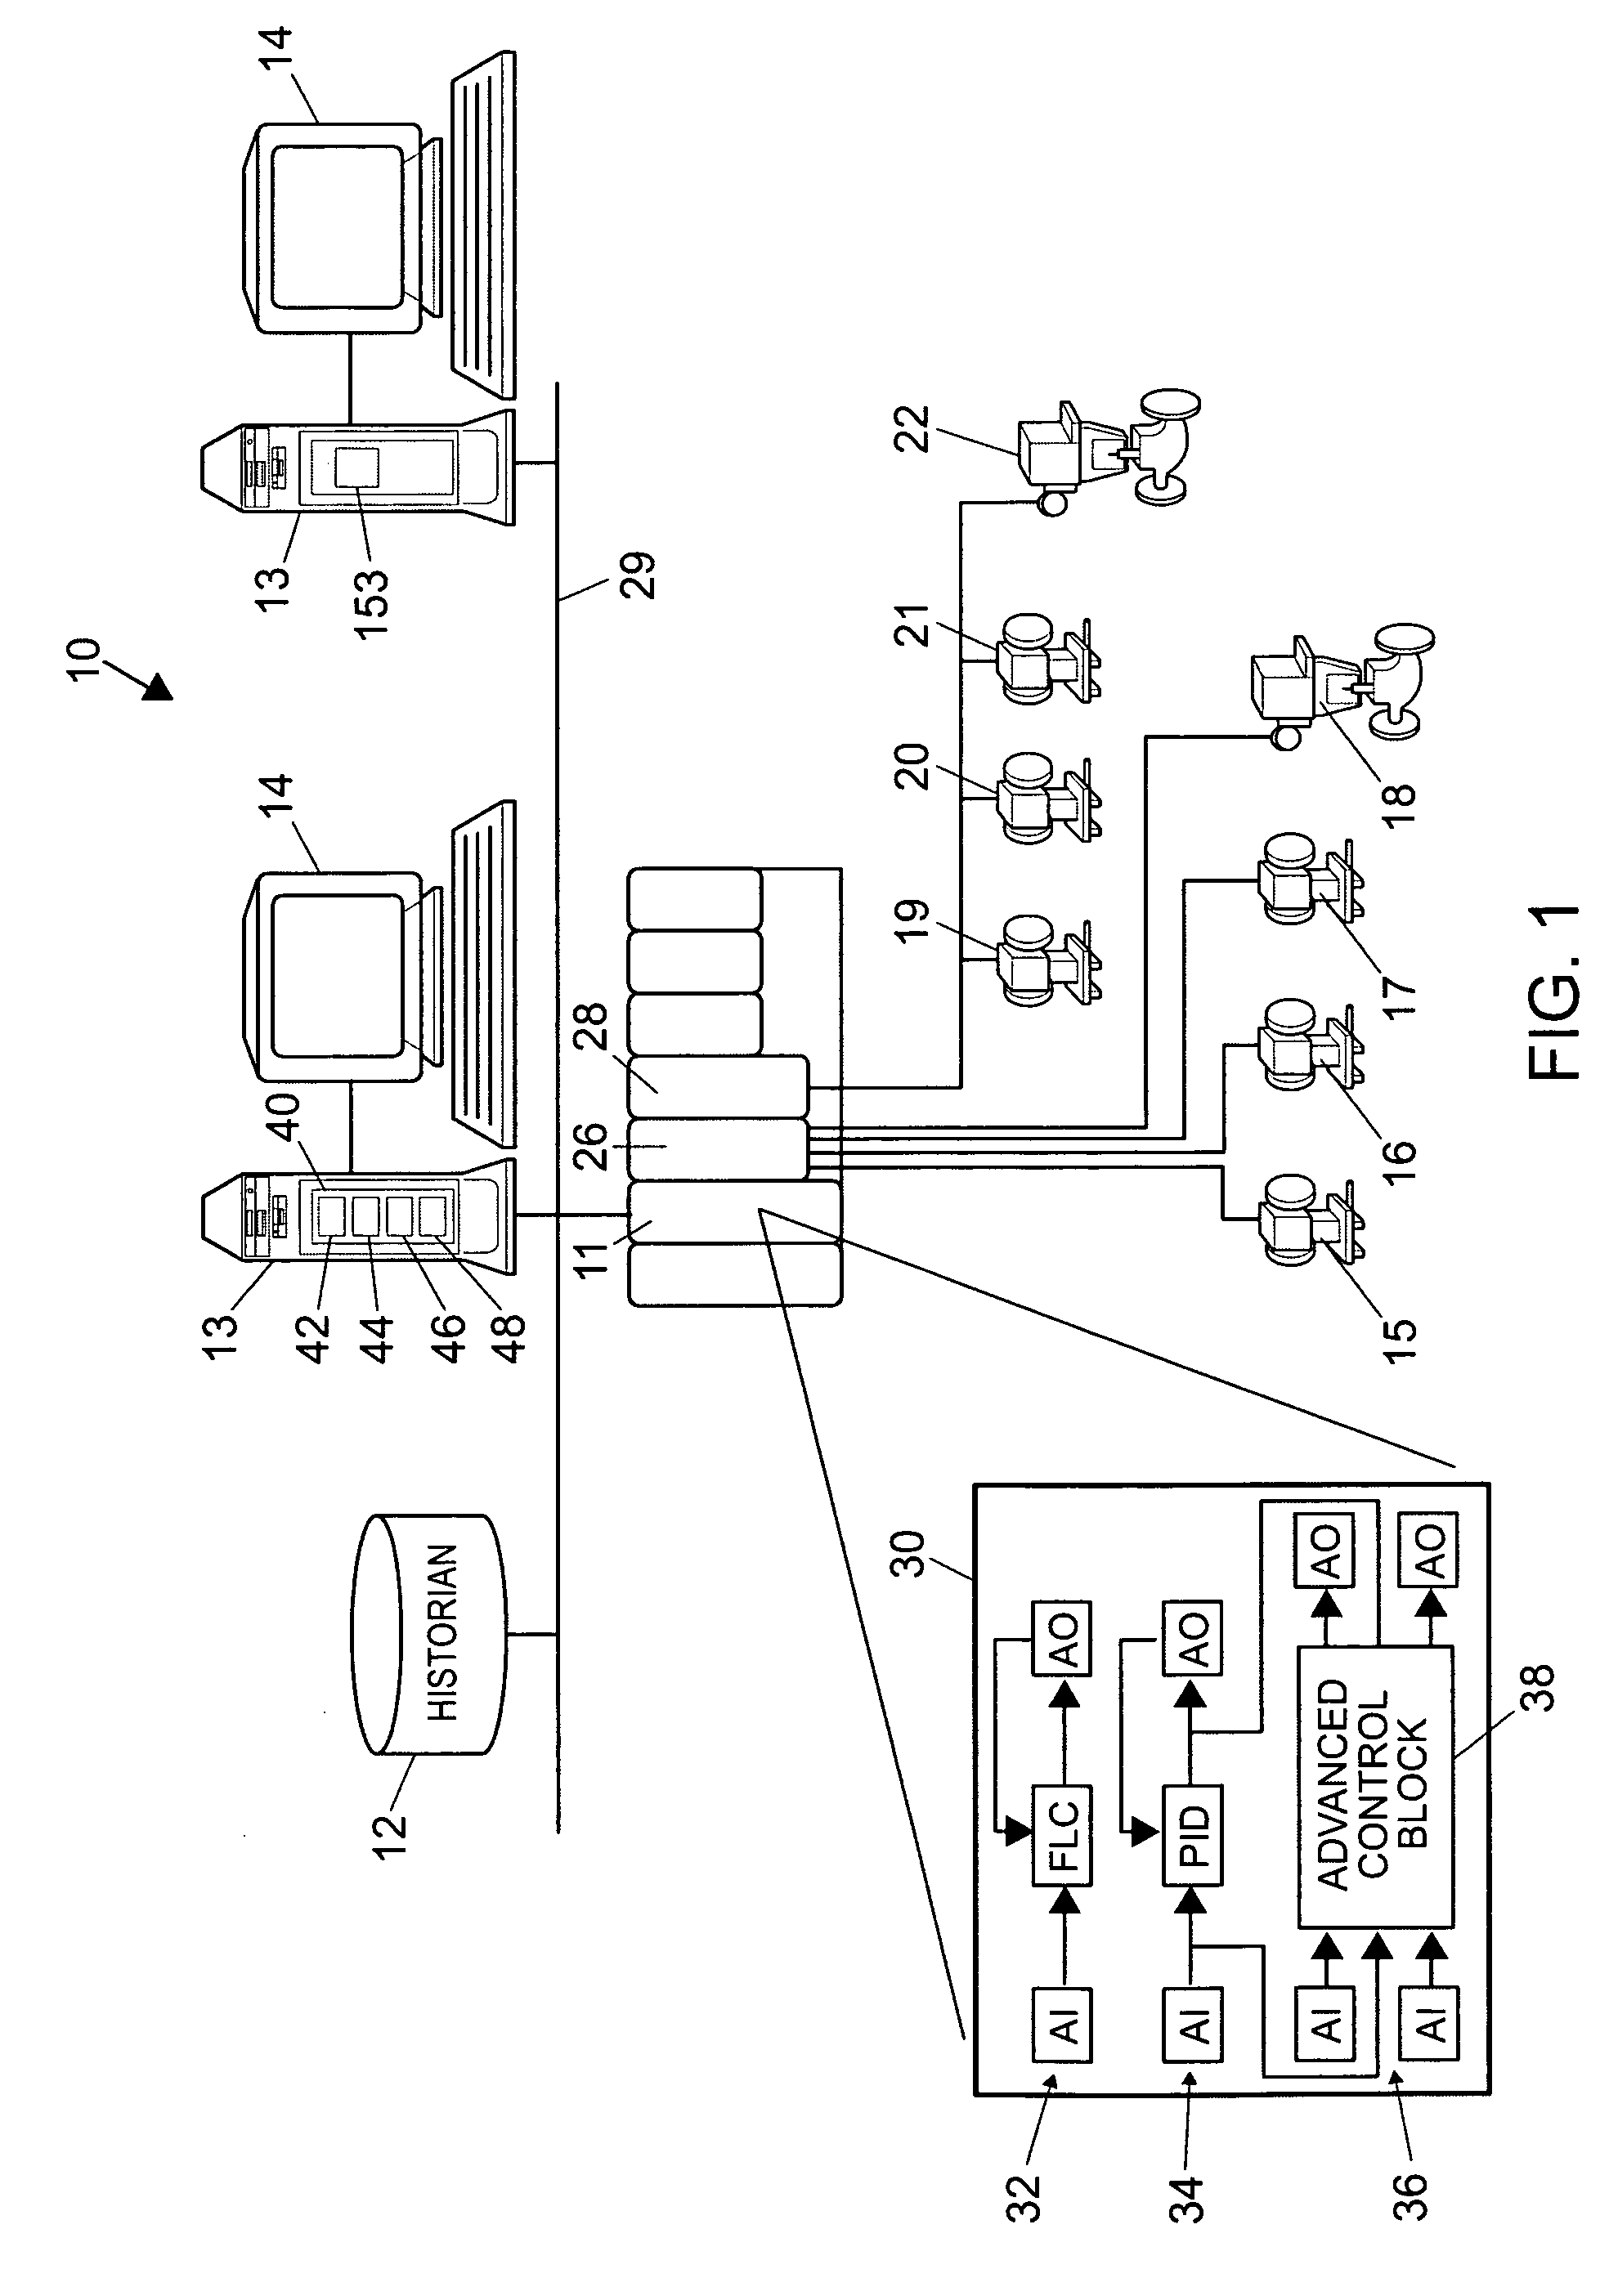 Integrated model predictive control and optimization within a process control system